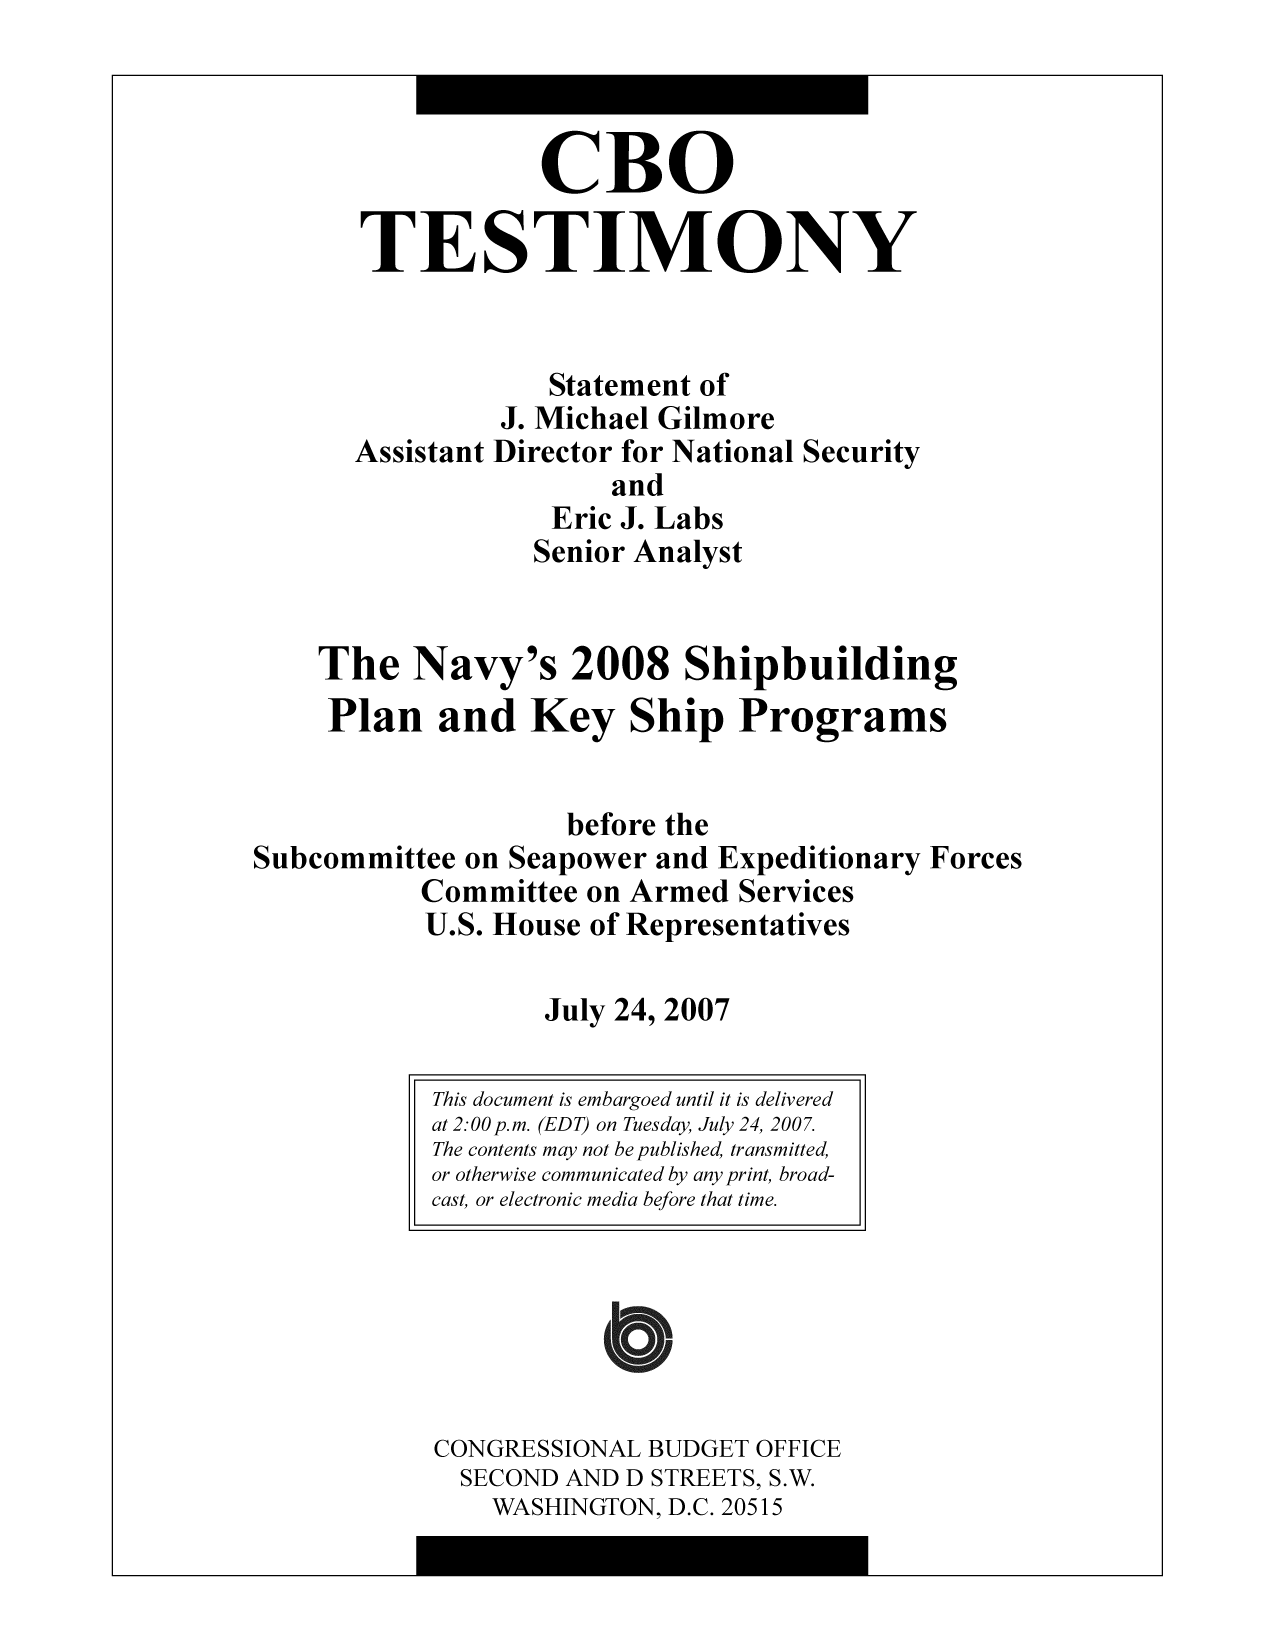 handle is hein.congrec/cbo9759 and id is 1 raw text is: CBO
TESTIMONY
Statement of
J. Michael Gilmore
Assistant Director for National Security
and
Eric J. Labs
Senior Analyst
The Navy's 2008 Shipbuilding
Plan and Key Ship Programs
before the
Subcommittee on Seapower and Expeditionary Forces
Committee on Armed Services
U.S. House of Representatives
July 24, 2007

CONGRESSIONAL BUDGET OFFICE
SECOND AND D STREETS, S.W.
WASHINGTON, D.C. 20515

This document is embargoed until it is delivered
at 2:00 p.m. (EDT) on Tuesday, July 24, 2007.
The contents may not be published, transmitted,
or otherwise communicated by any print, broad-
cast, or electronic media before that time.


